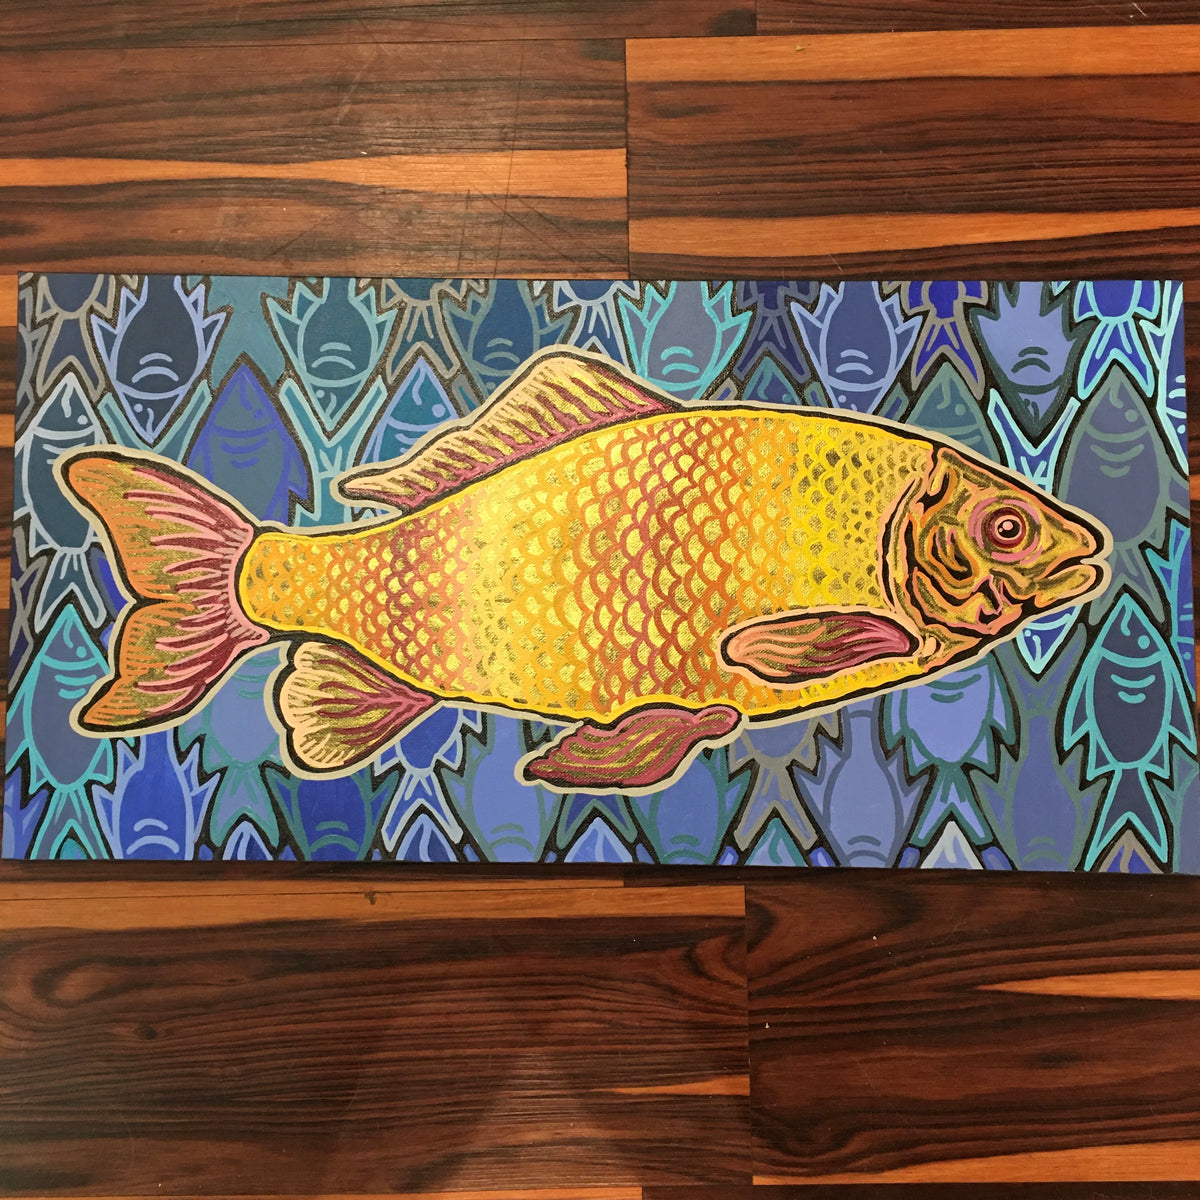 Fish on Canvas by Heather Mattingly